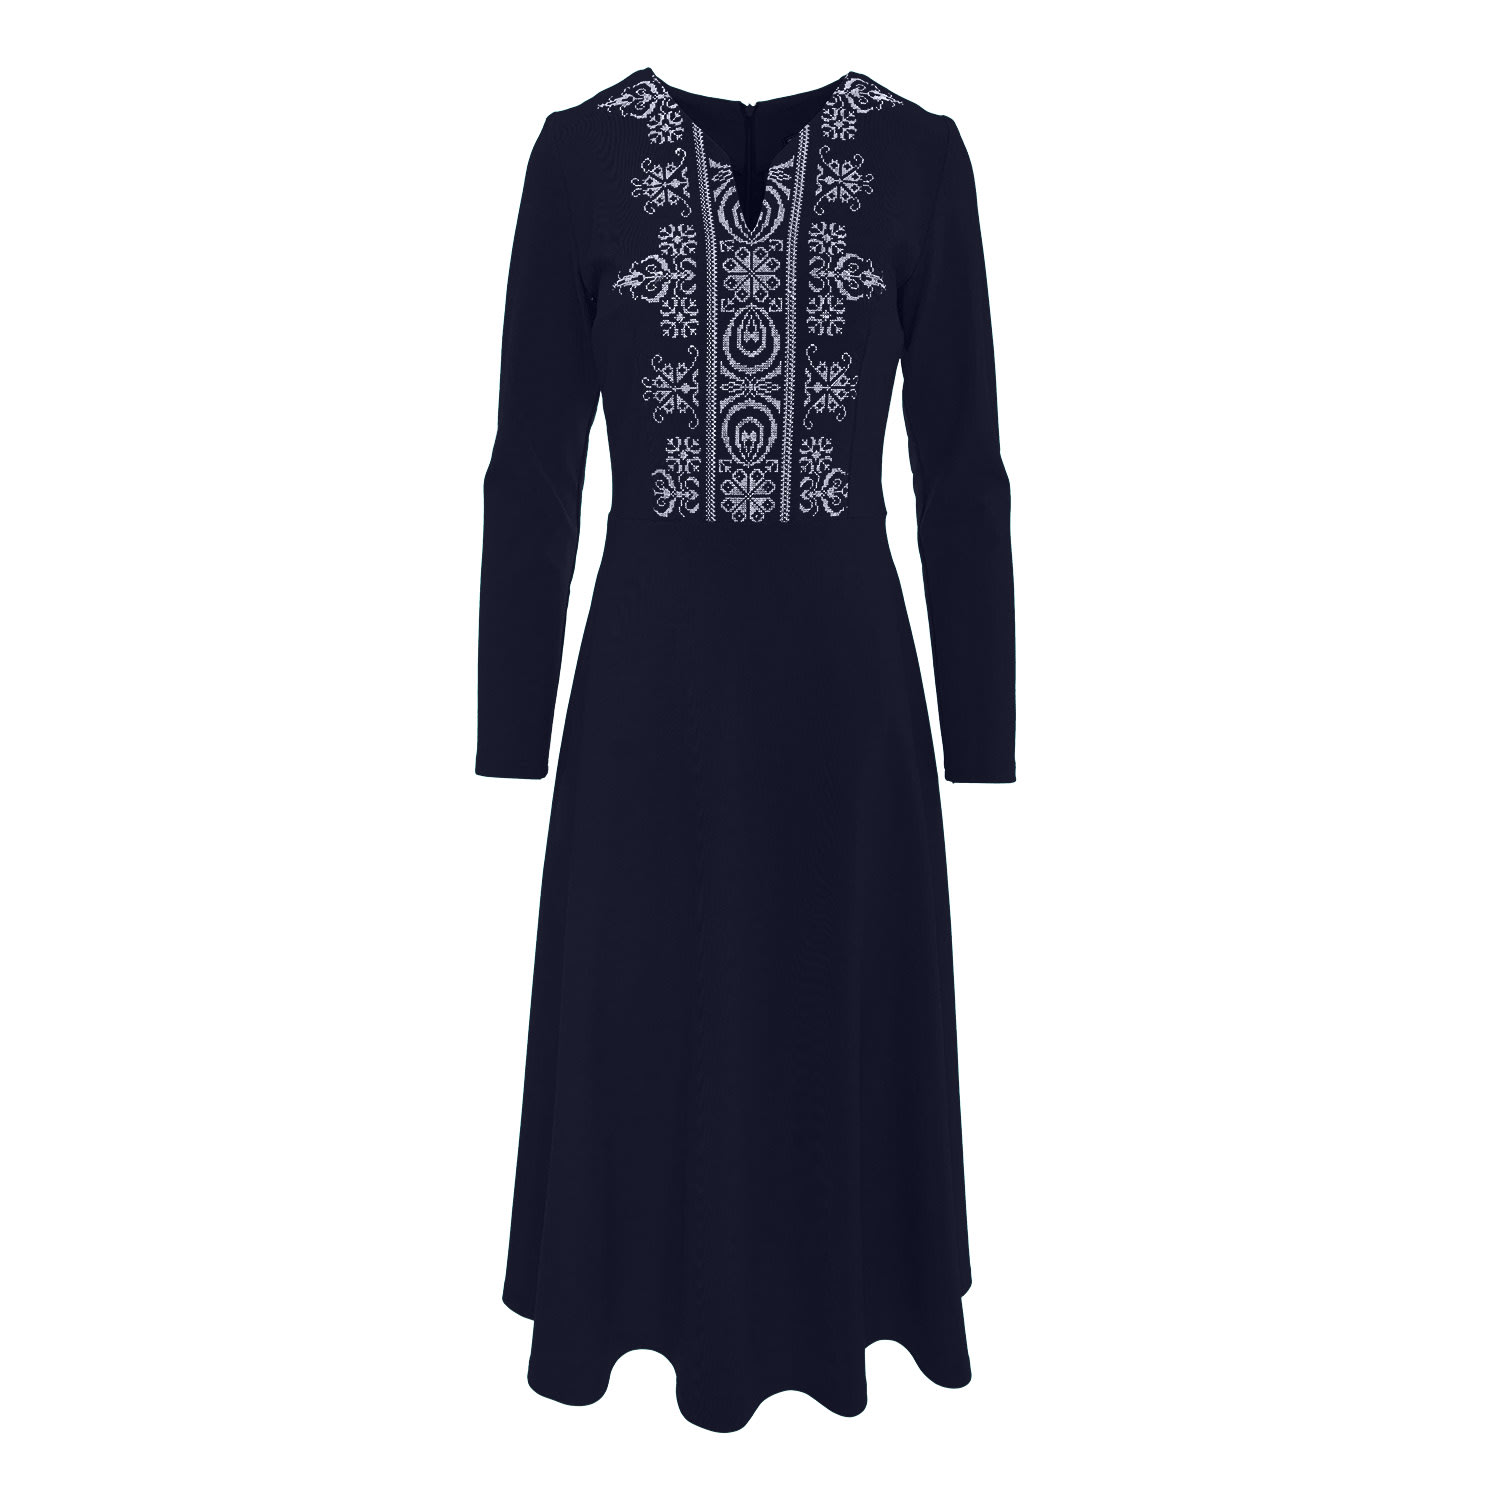 Women’s Midi Dress In Navy Blue Jersey With Floral Embroidery Extra Small Izabela Mandoiu